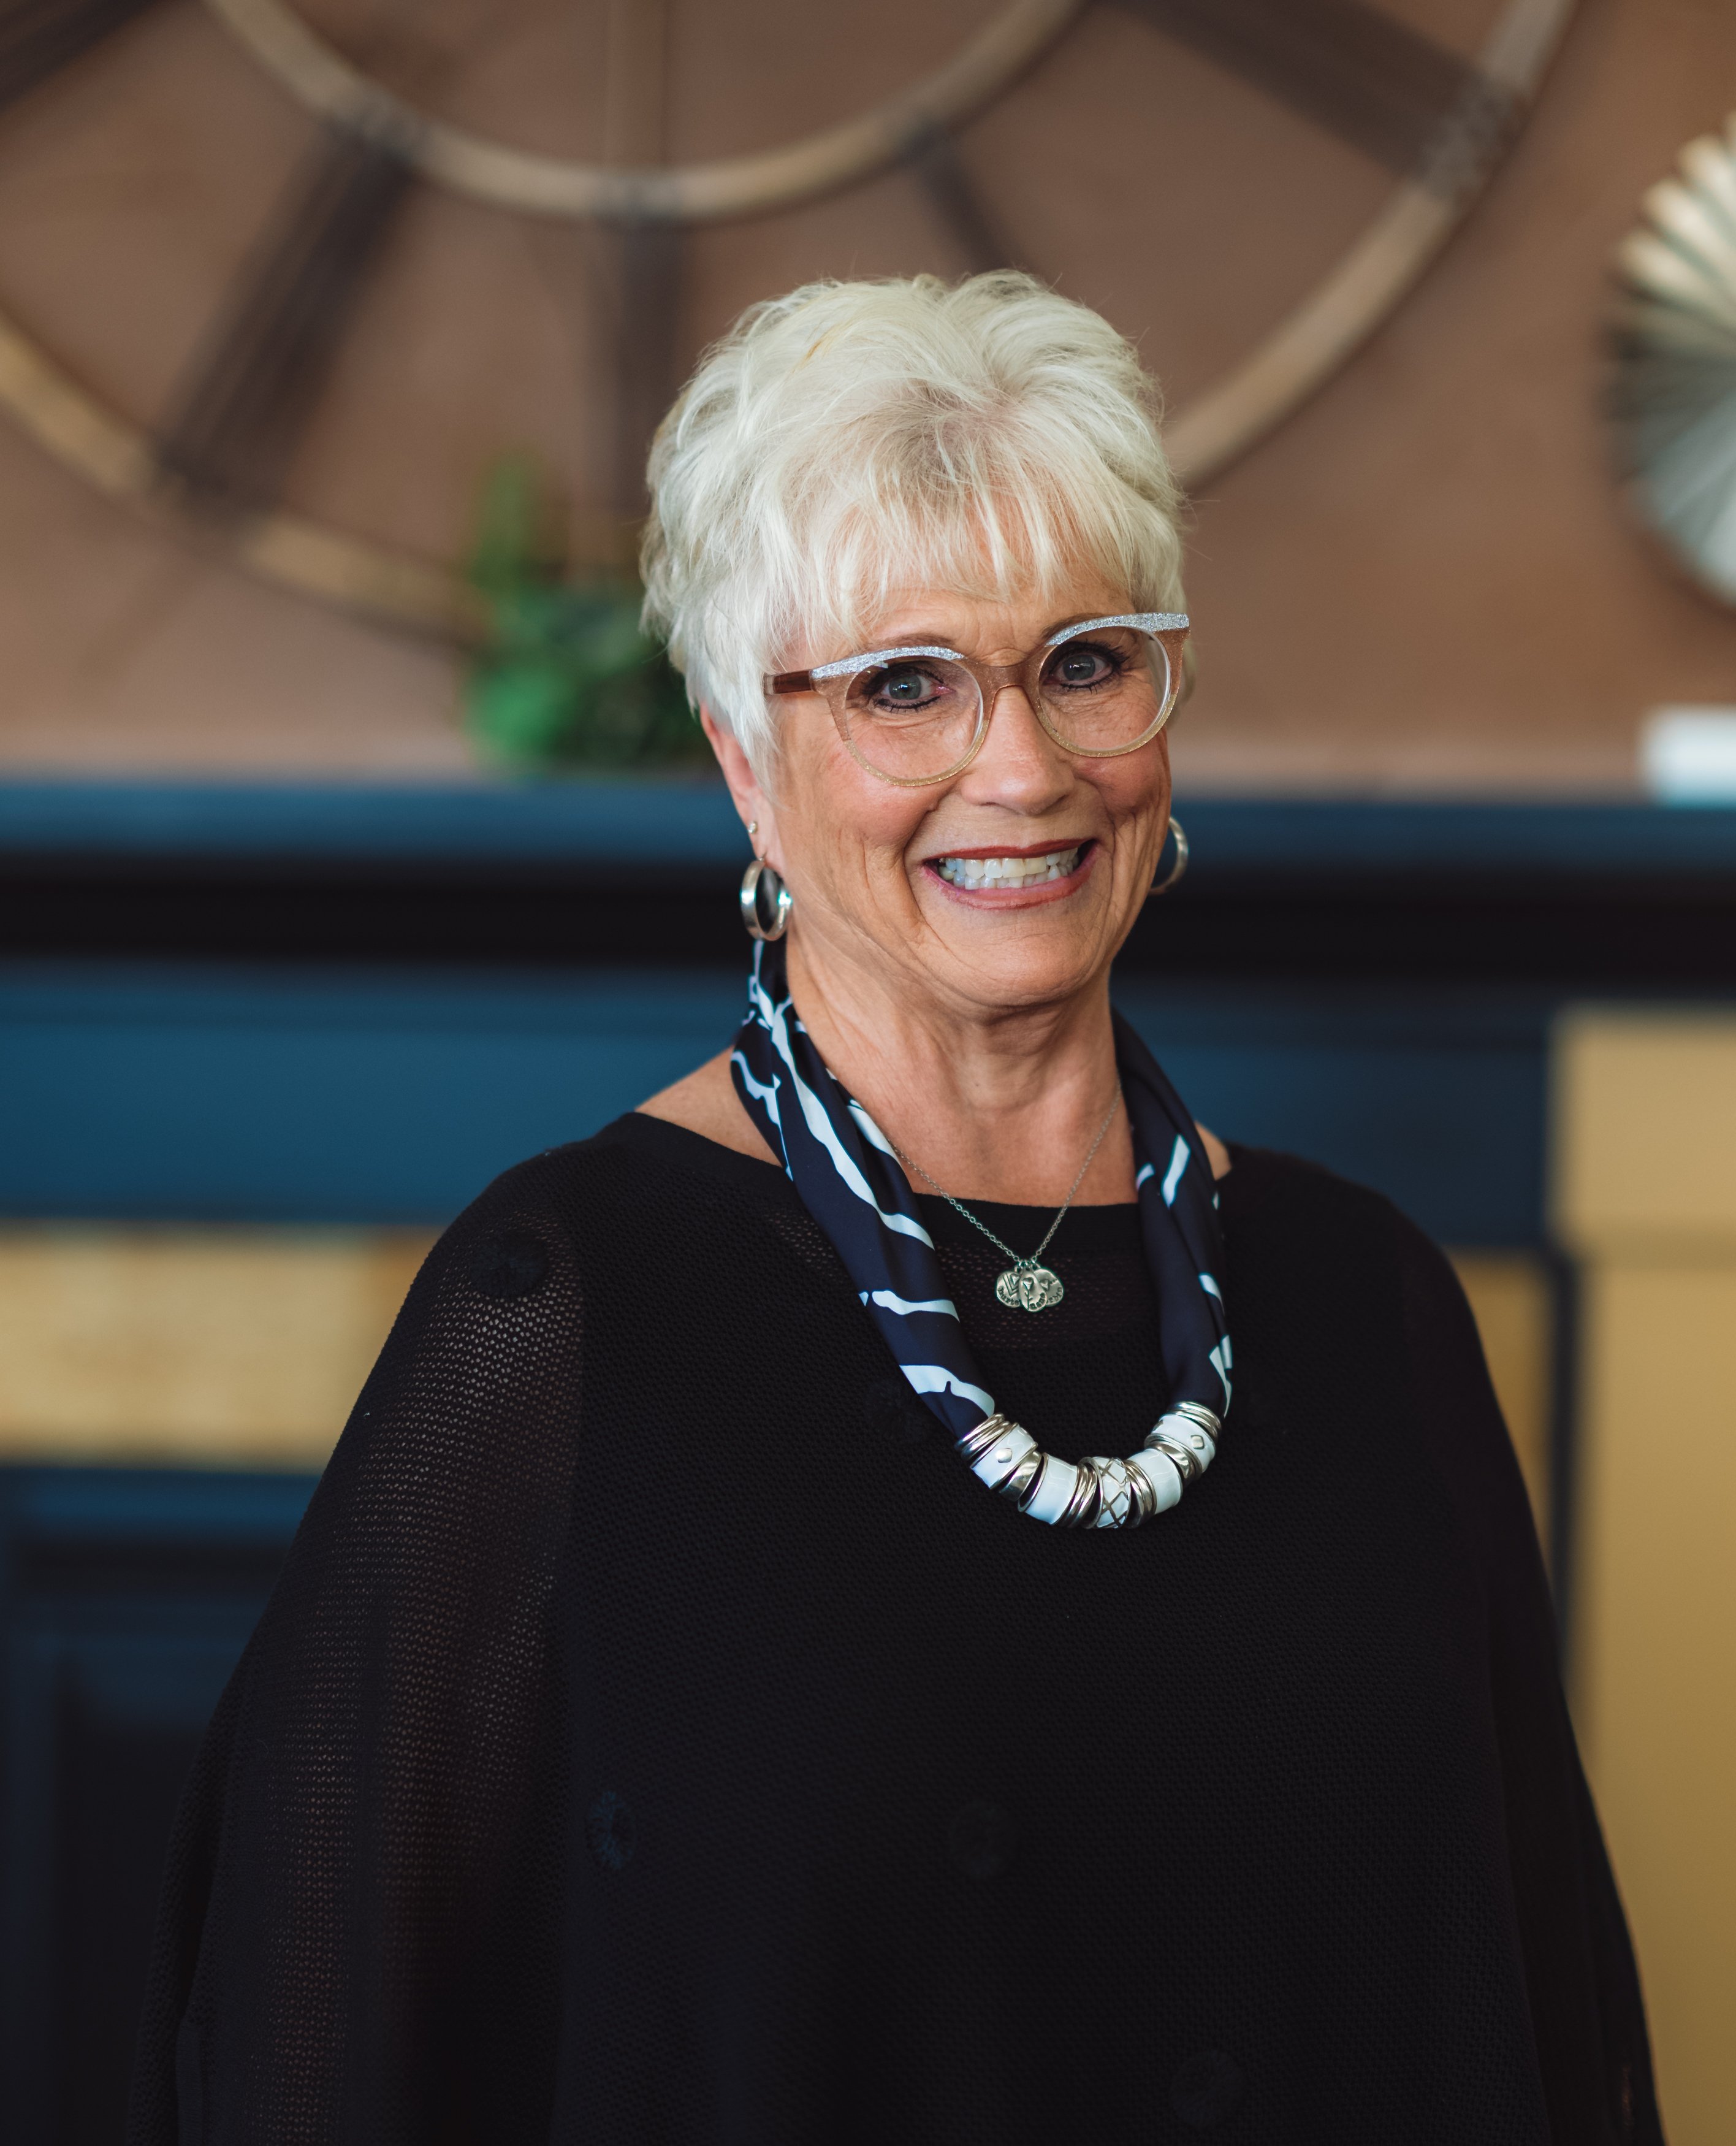 Deb, Co-Owner, has been in business management for more than 35 years. Having many years of experience, she is vital to keeping the business running smoothly. Customer service and satisfaction is what Deb is all about. Her expertise with design, from inte